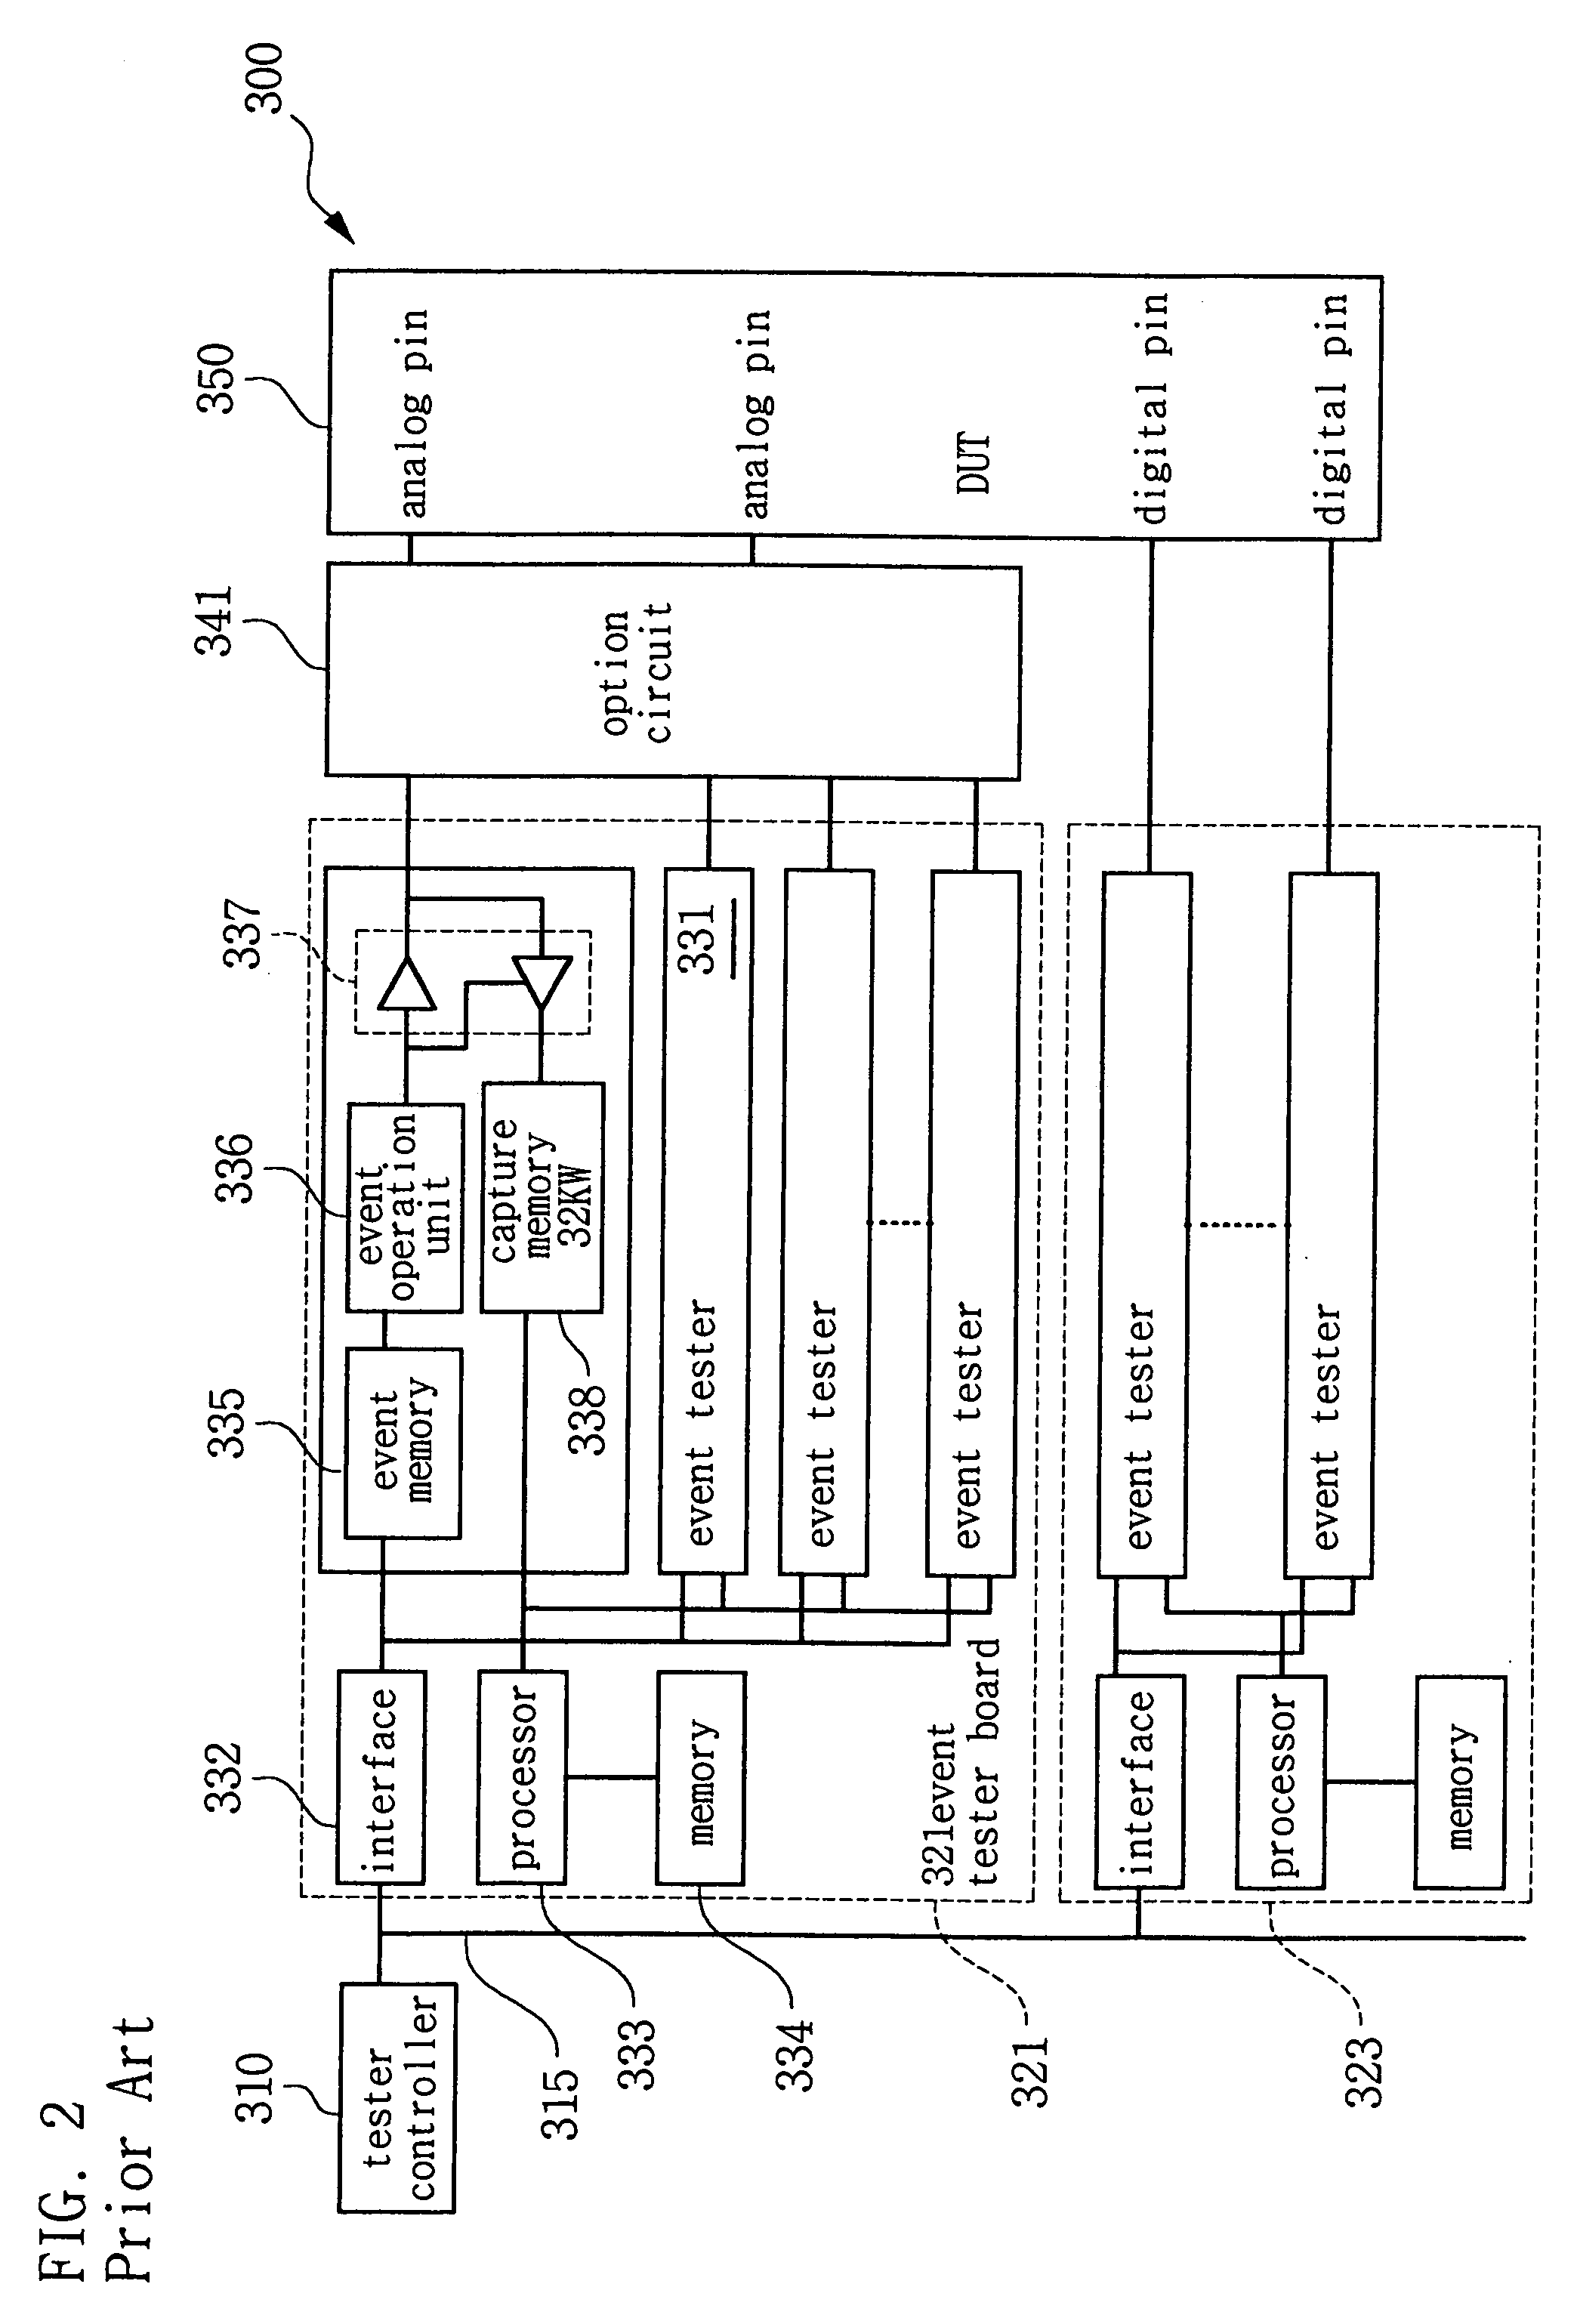 Test apparatus for mixed-signal semiconductor device